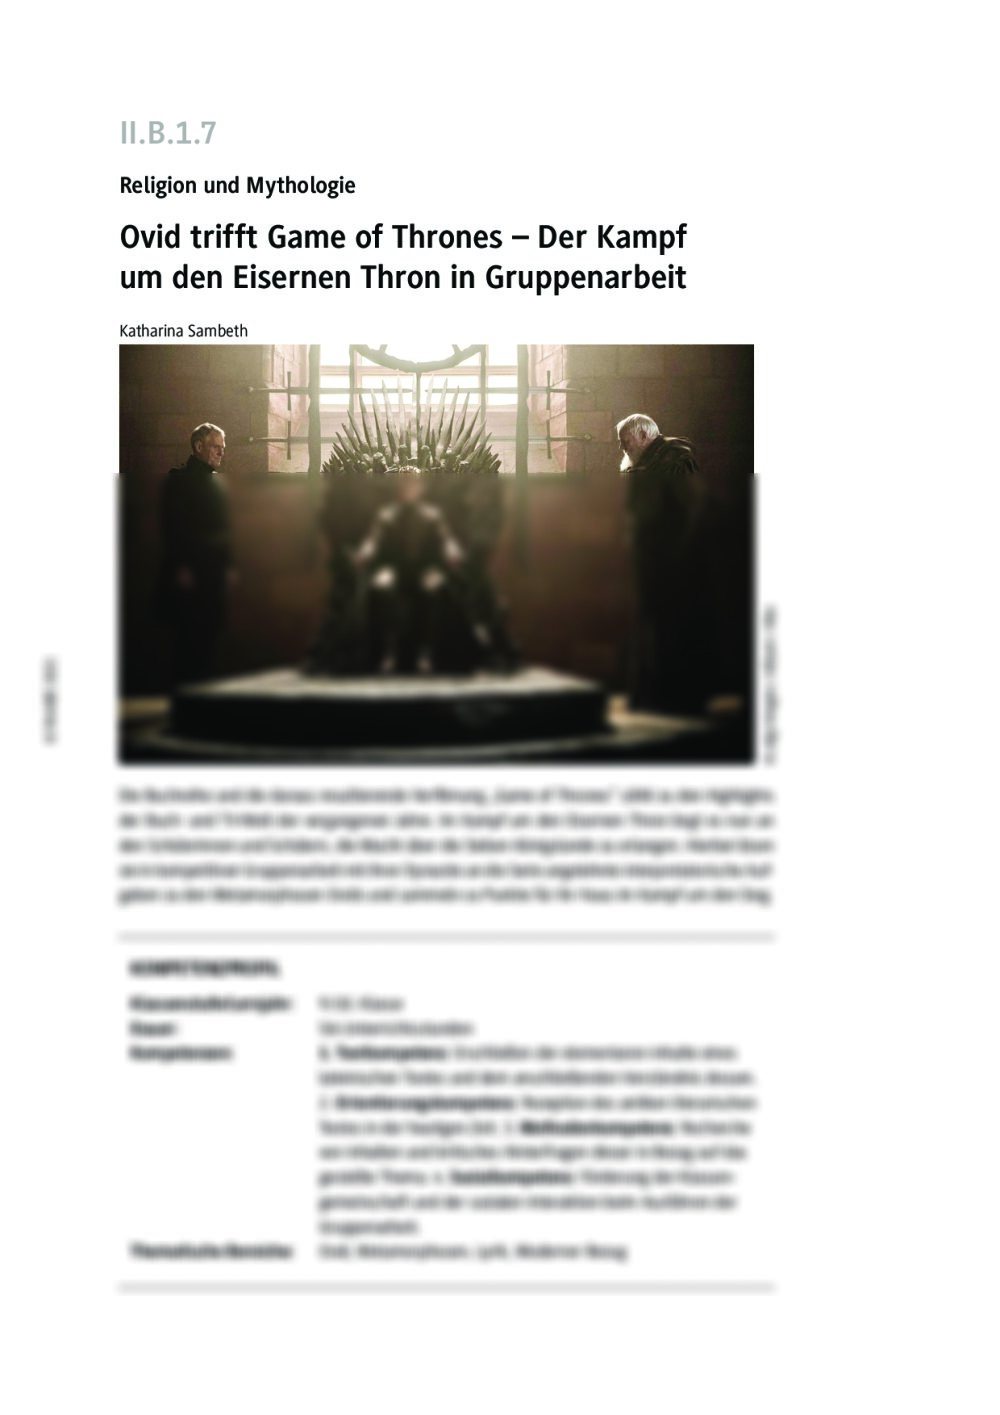 Ovid trifft Game of Thrones - Seite 1